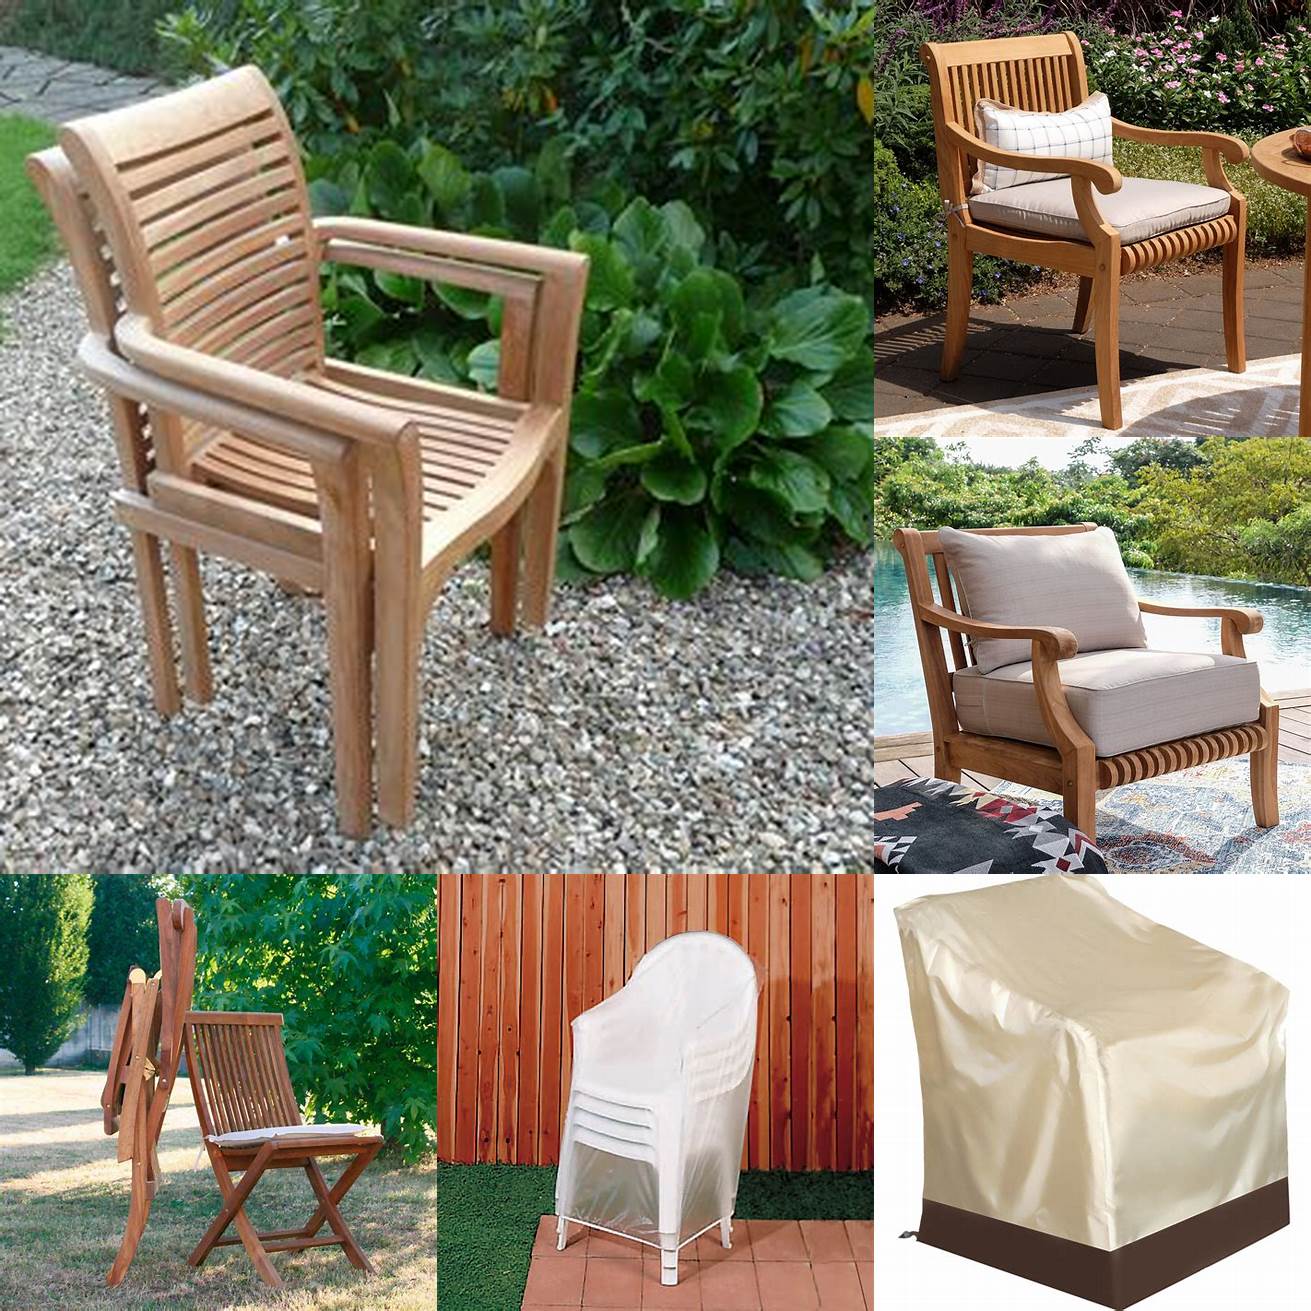 Outdoor Teak Furniture Covered with a Chair Cover